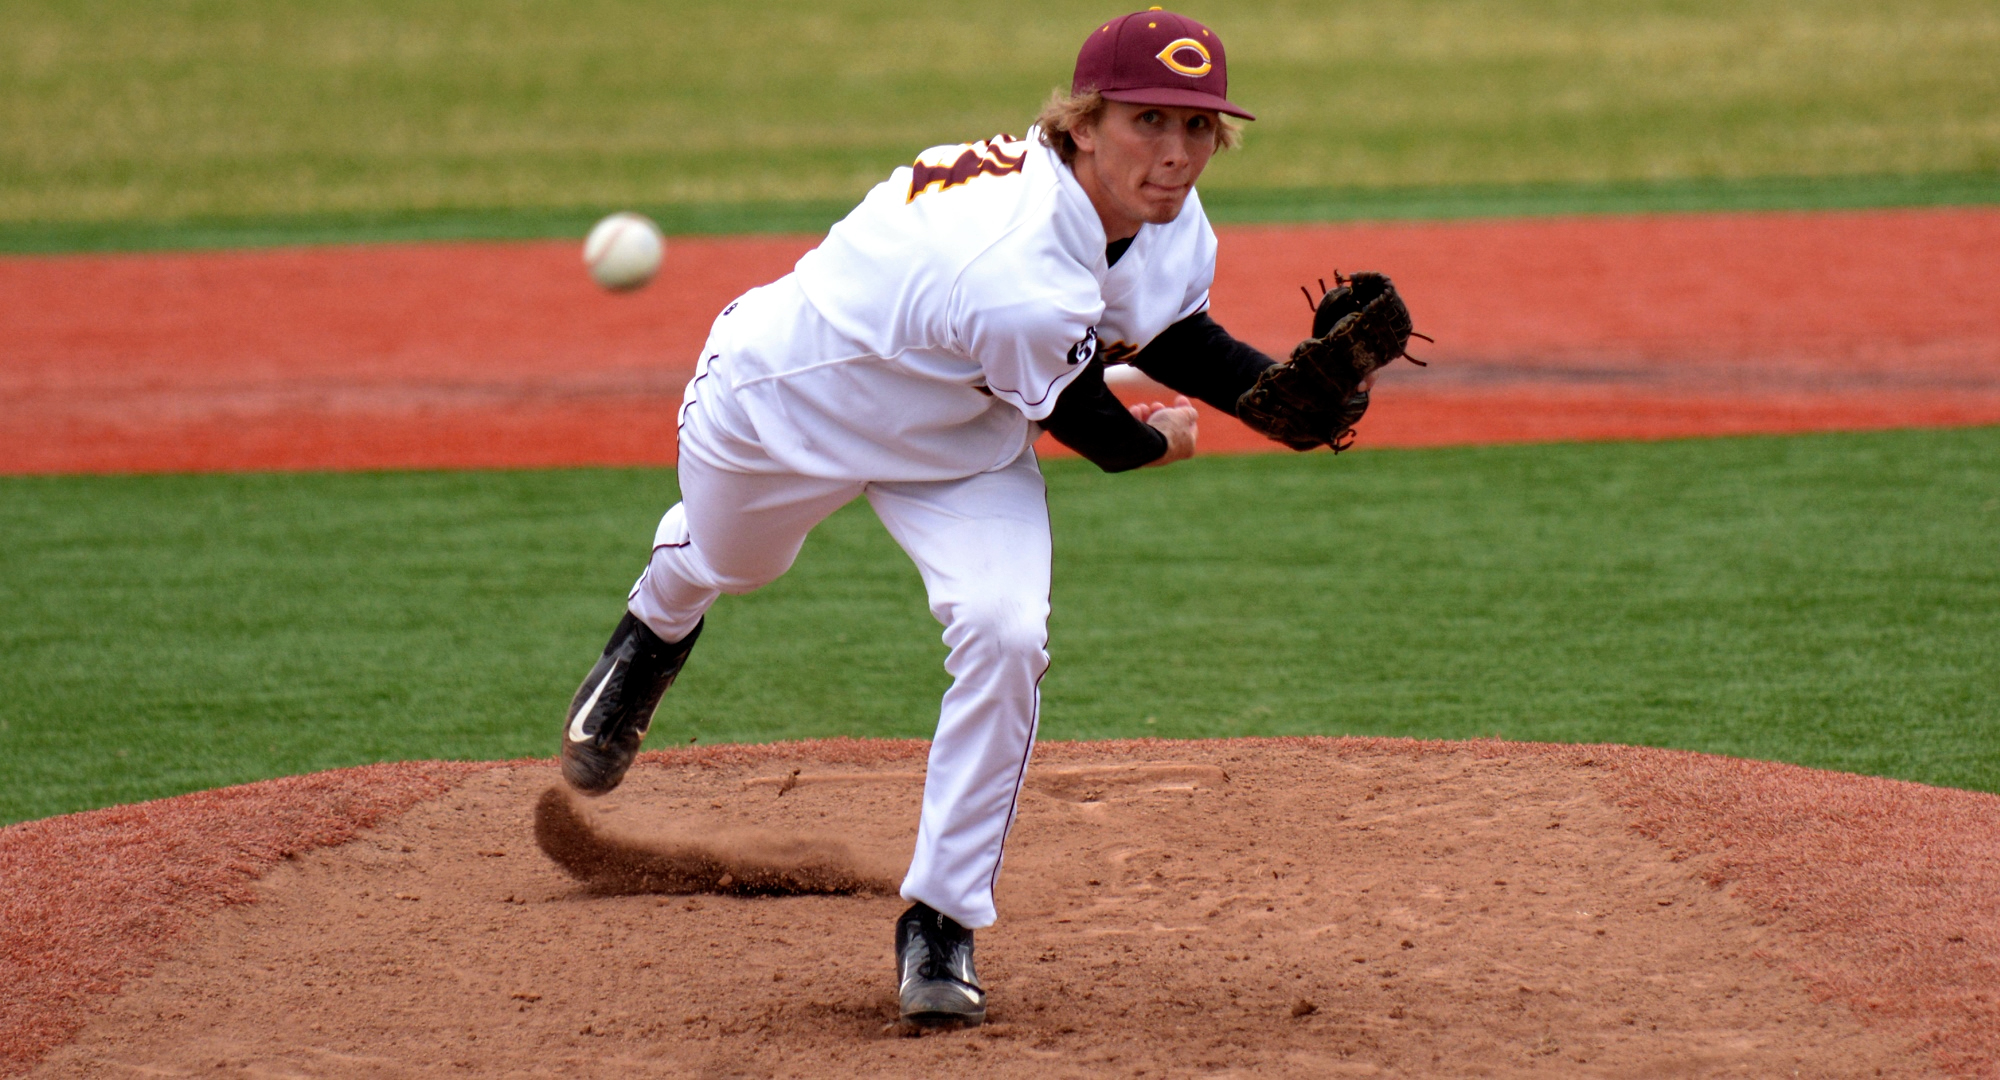 Freshman Austin Ver Steeg delivers a pitch in the first game of the Cobbers' DH vs. Carleton. He went the full 7.0 innings and didn't allow an earned run.